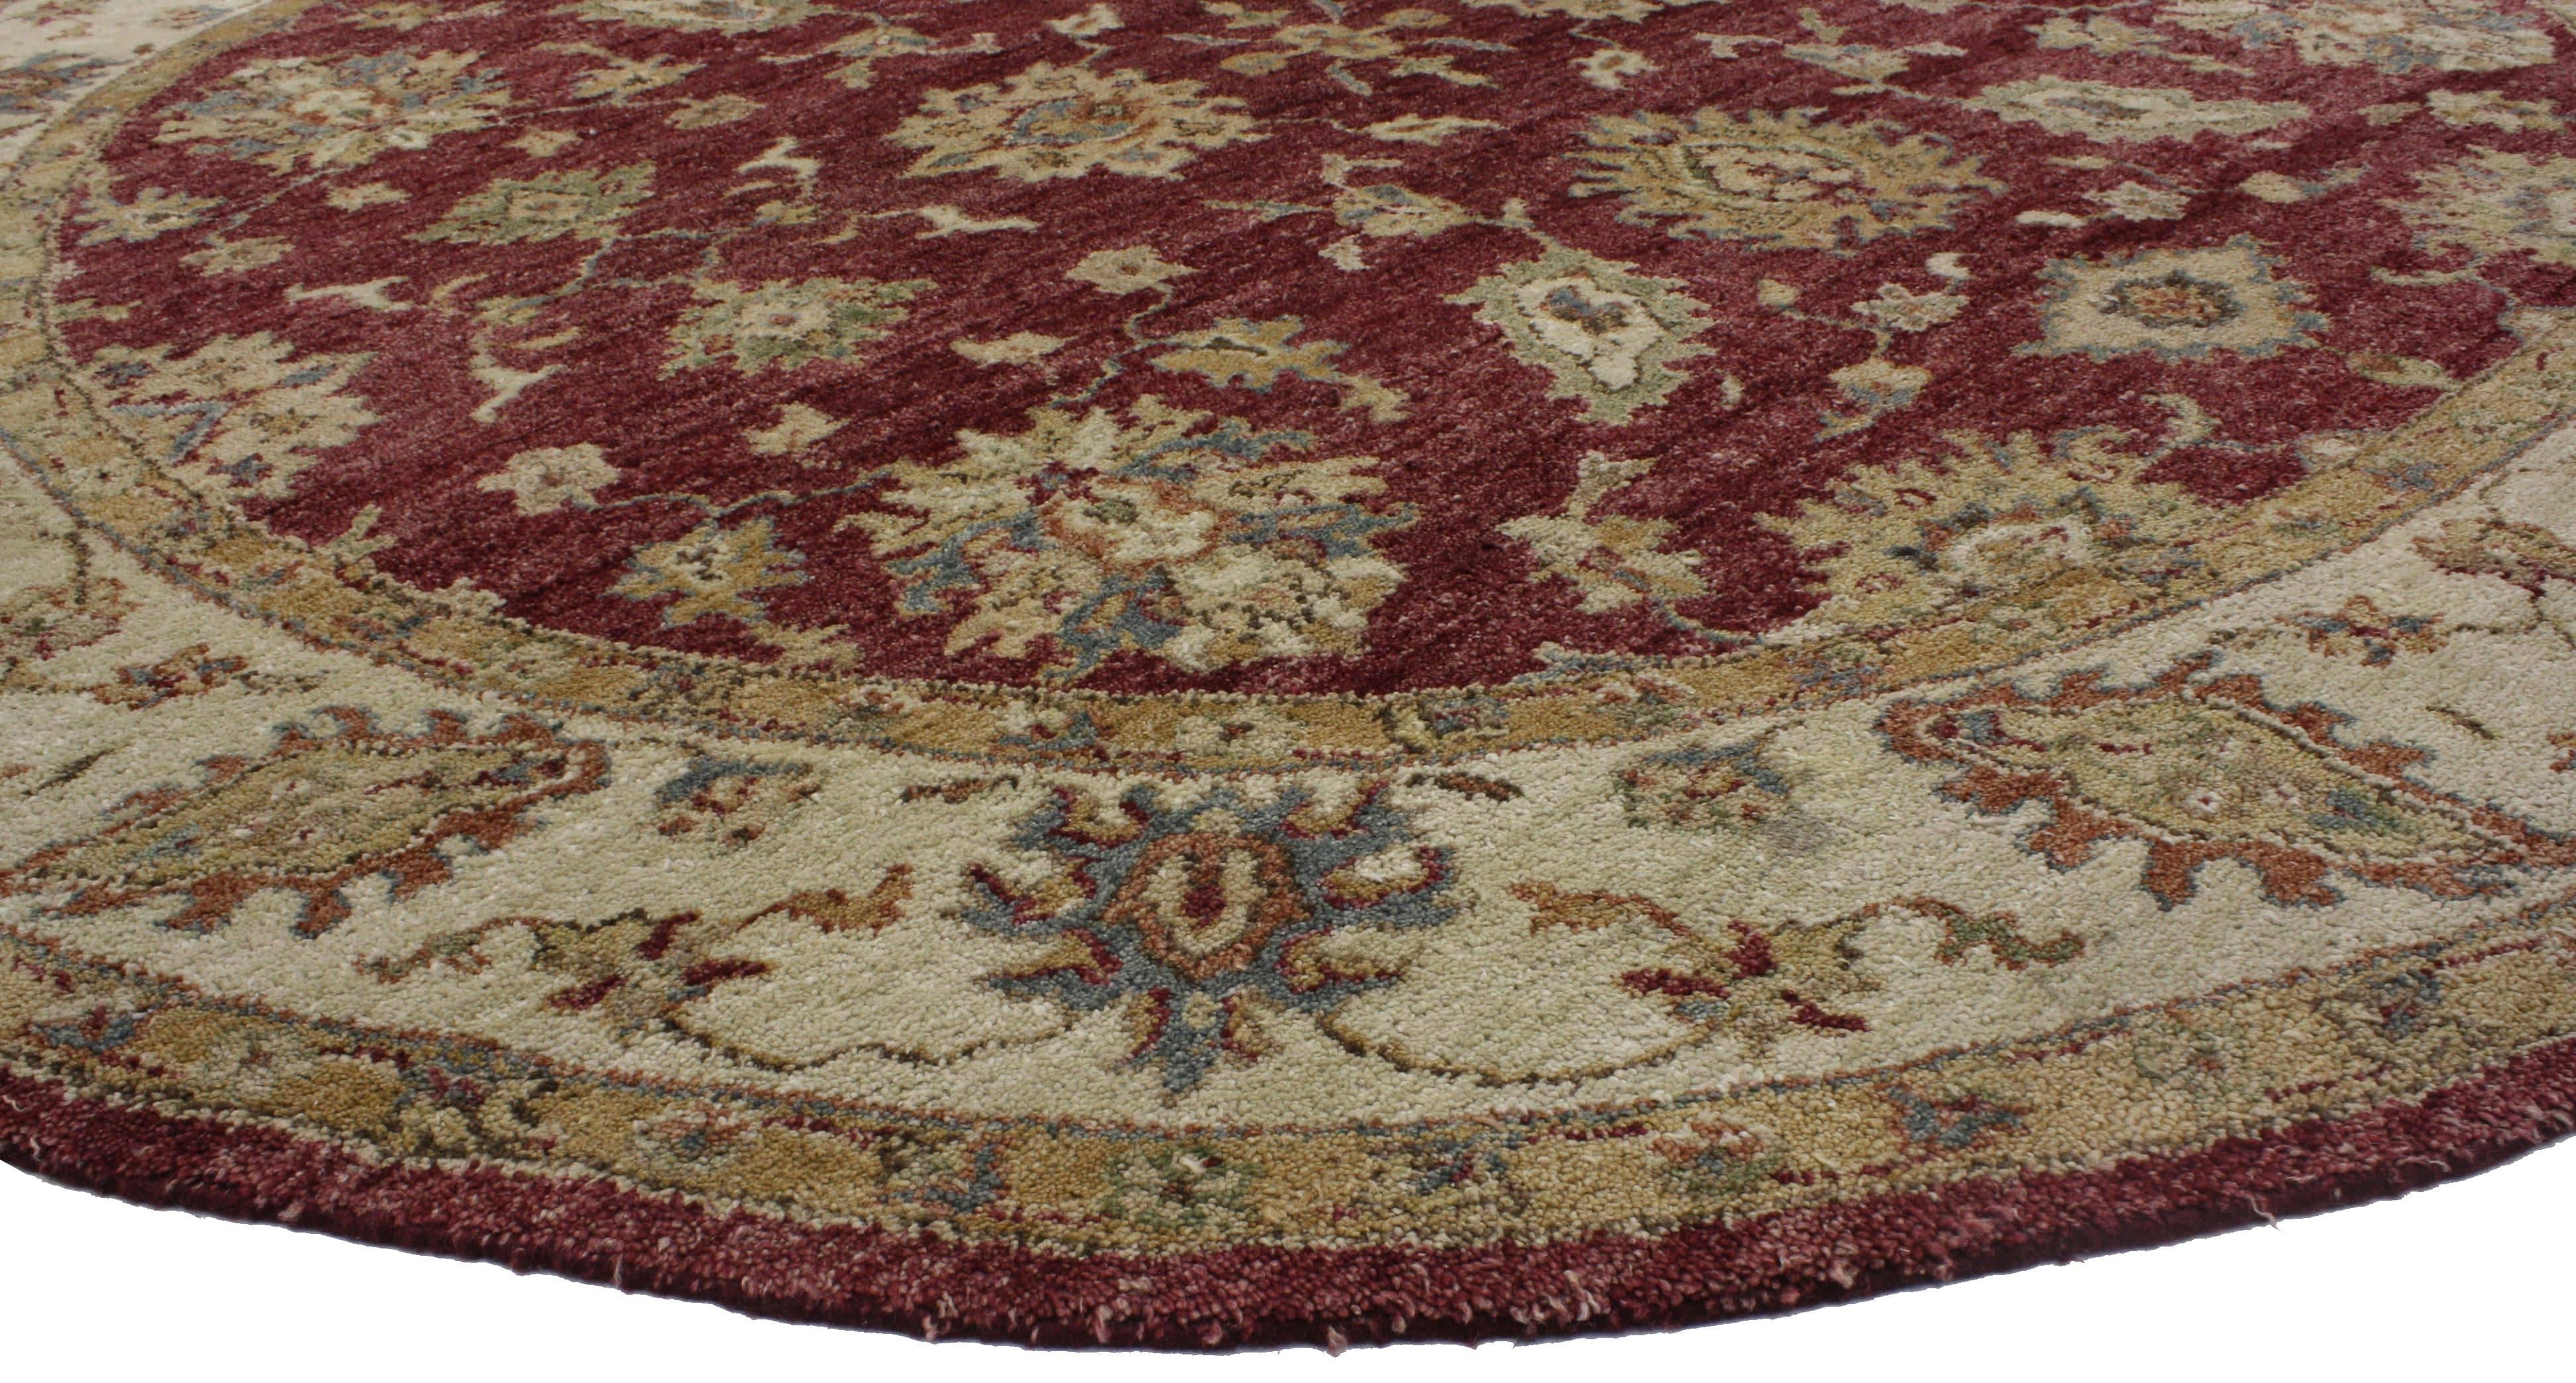 76662, vintage Indian round area rug, circular rug with Traditional Style. This vintage hand knotted wool Indian round area rug features an all-over floral pattern spread across an abrashed burgundy field. Large harshang palmettes, leafy tendrils,